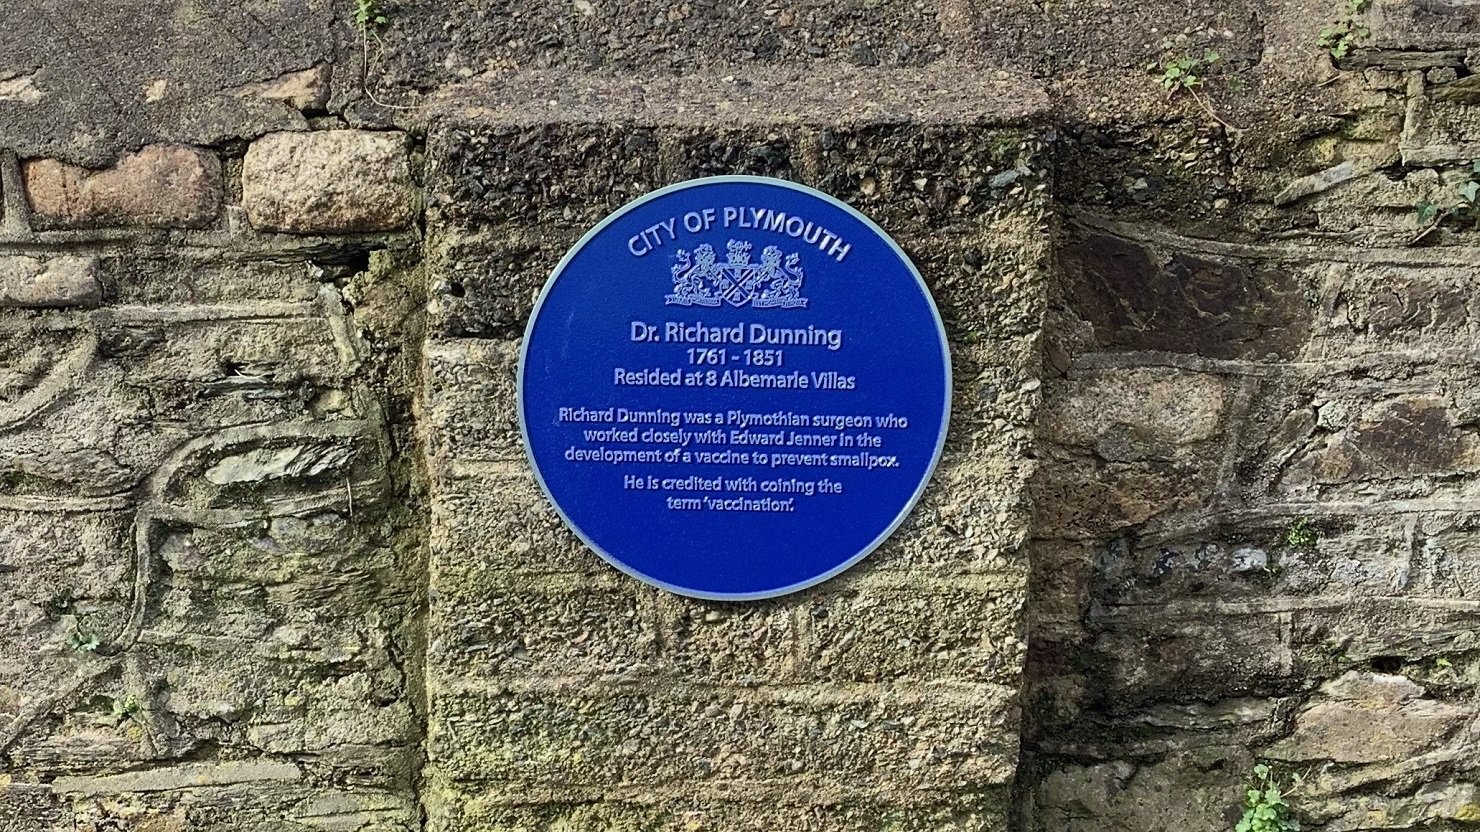 New blue plaque commemorates ground breaking Plymouth surgeon